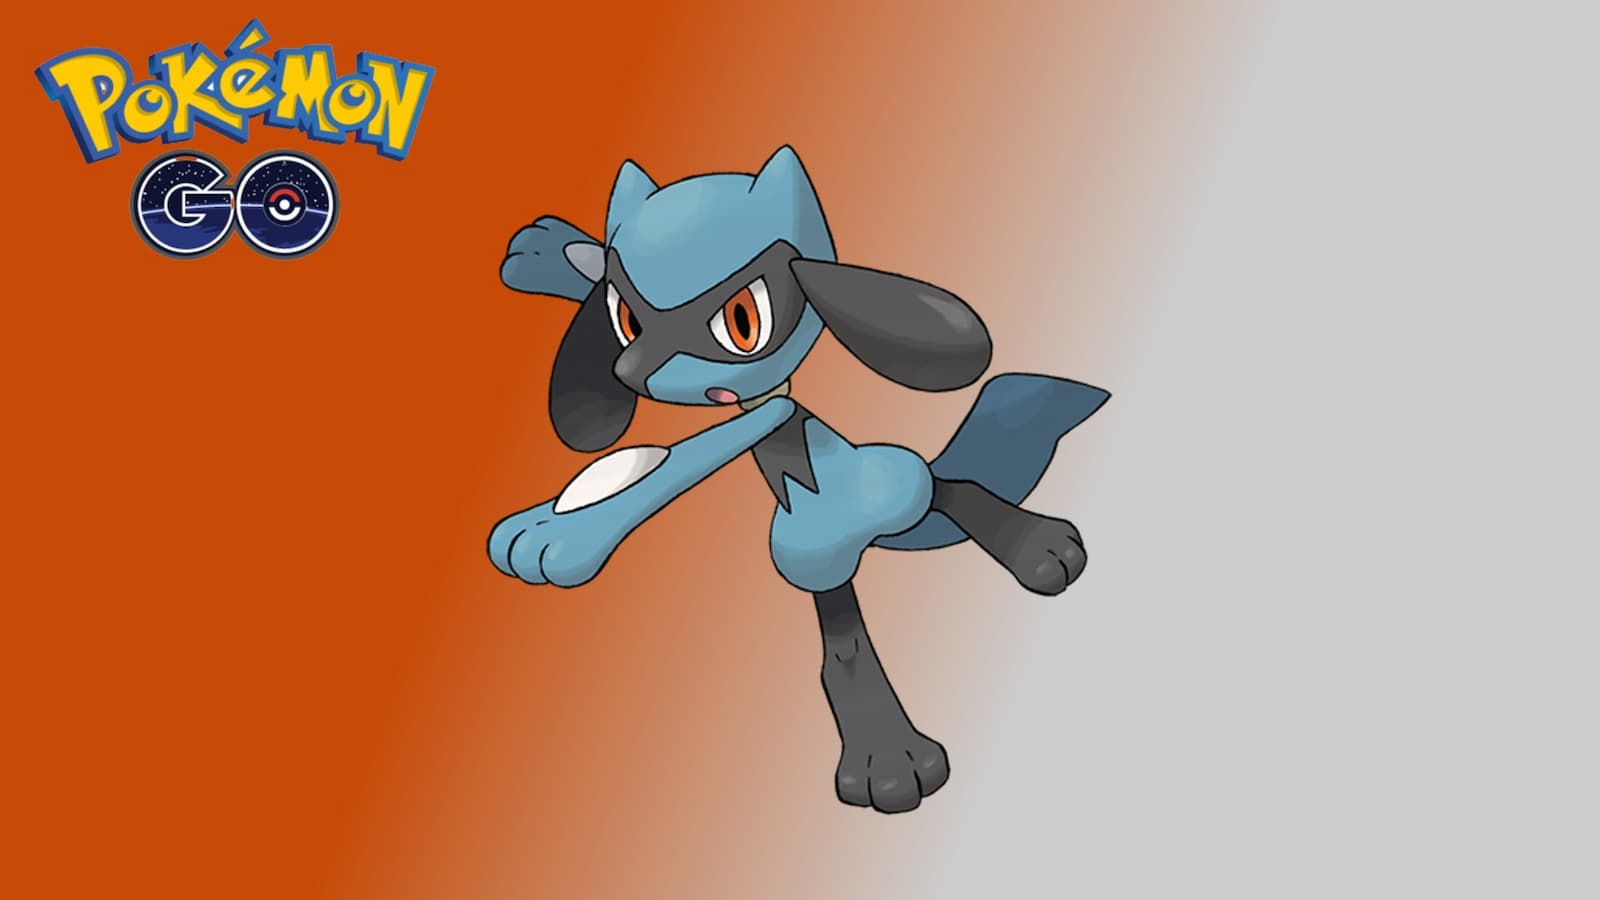 Riolu is the first star of a new Pokémon GO event—Hatch Day!